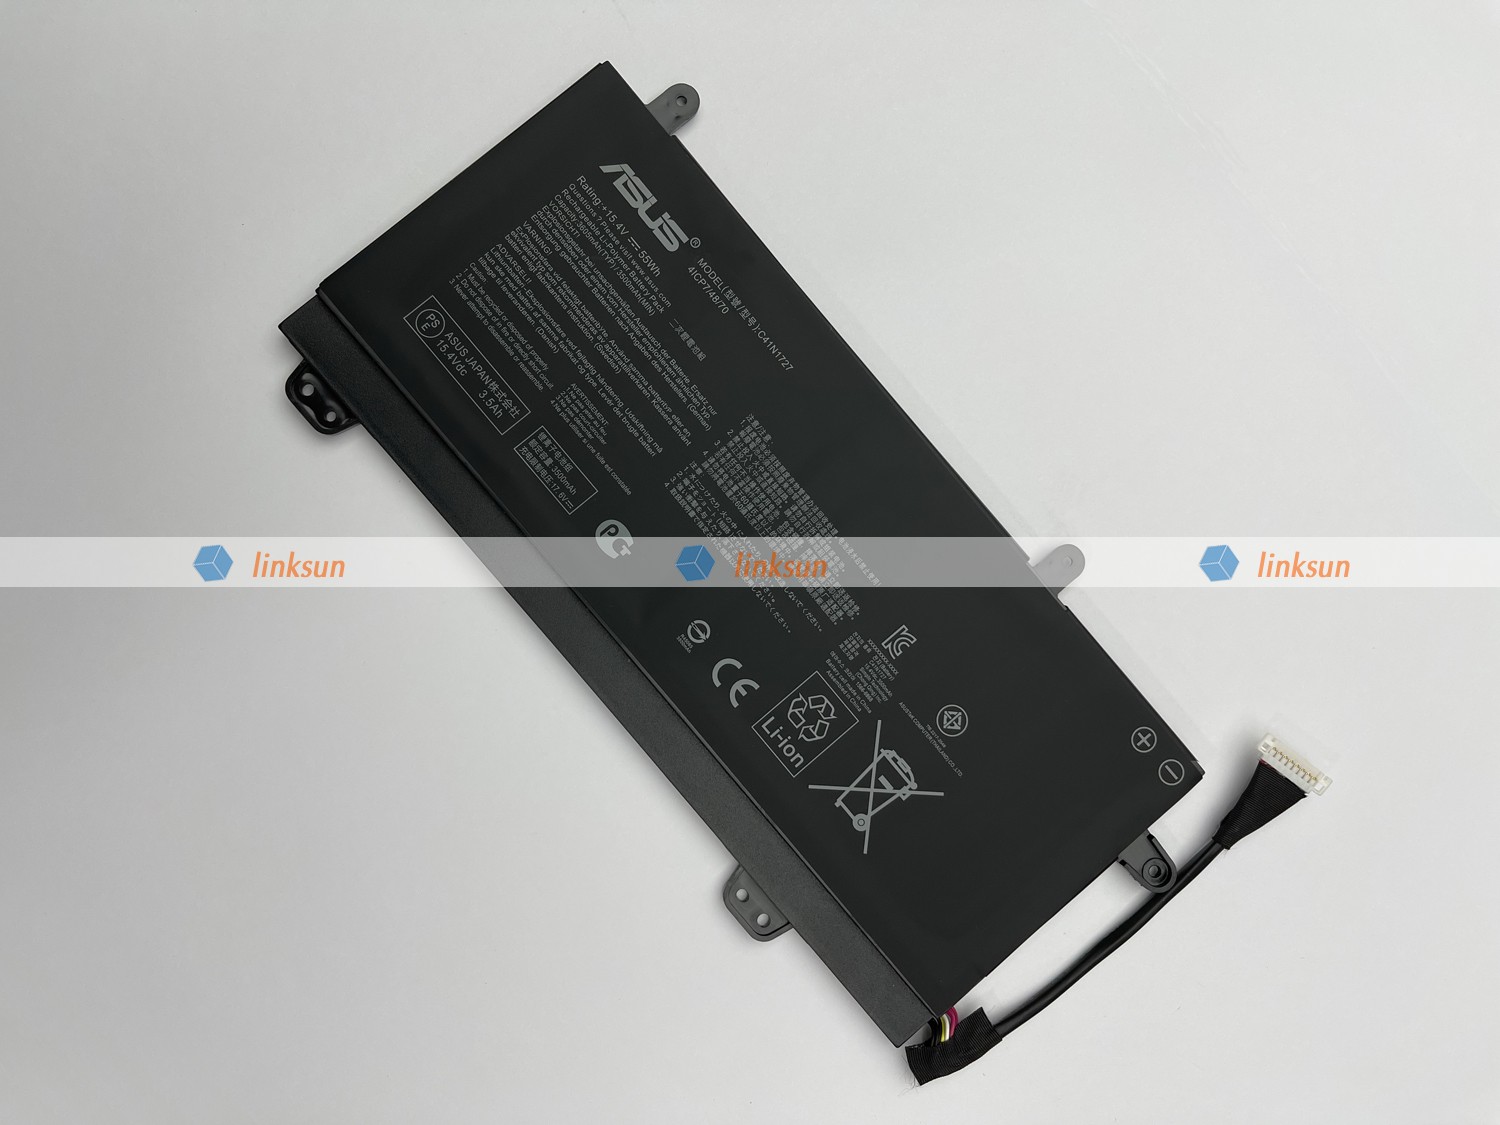 C41N1727 battery inclined